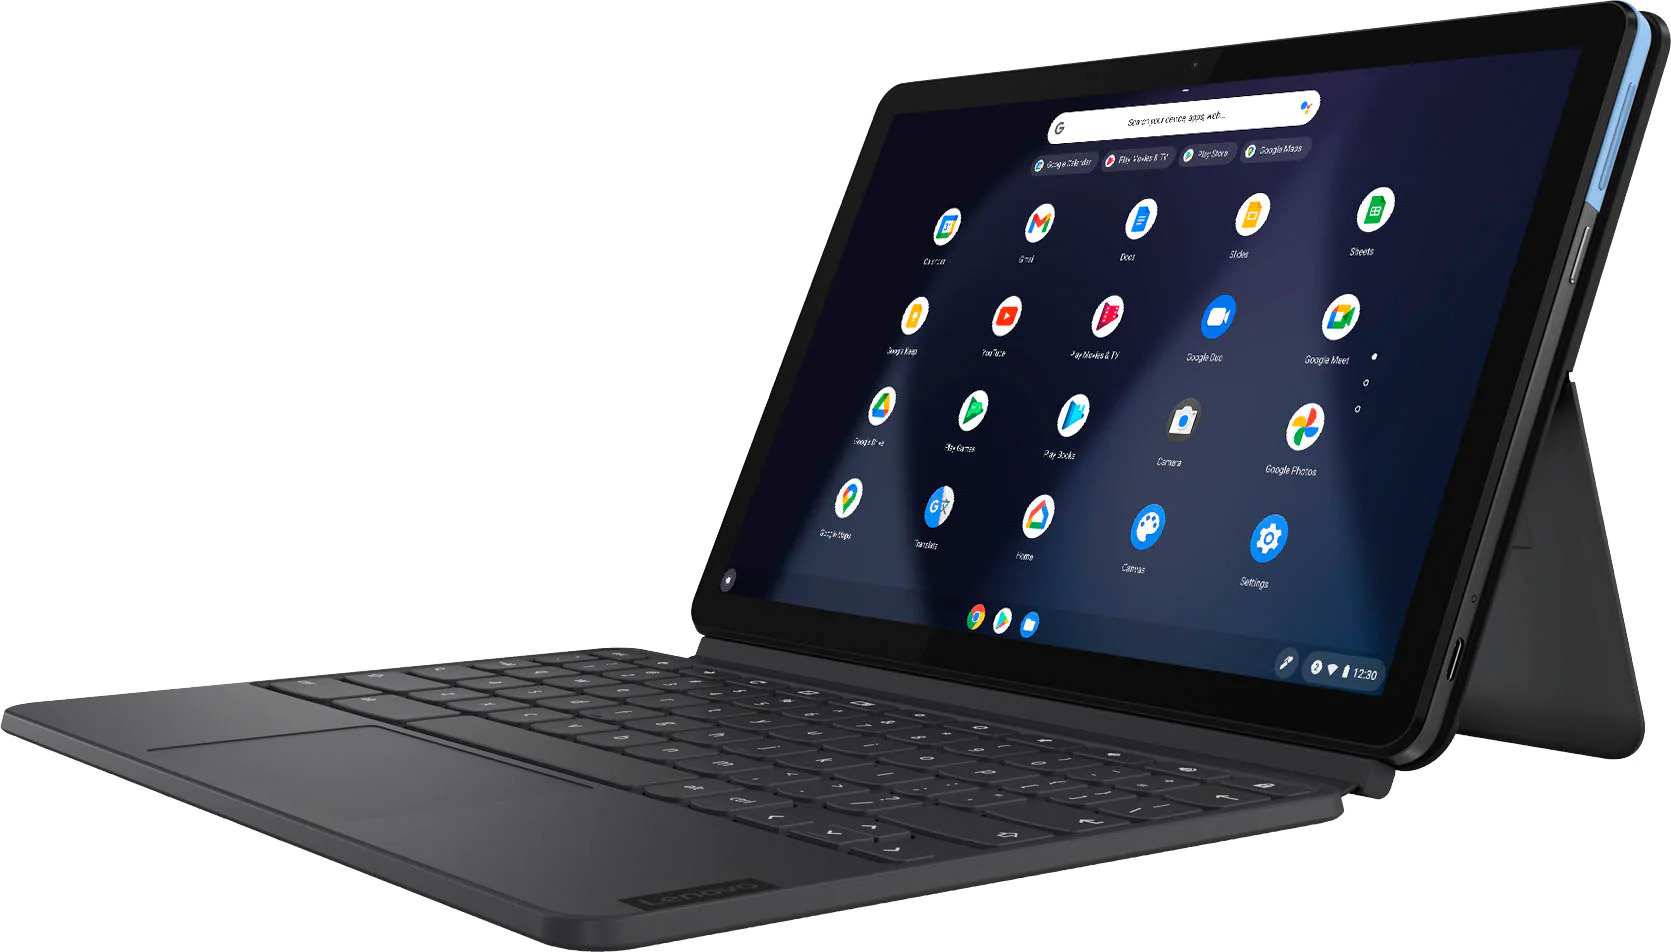 Lenovo - Chromebook Duet - 10.1” Touch Screen Tablet - 4GB Memory - 128GB SSD - with Keyboard - Ice Blue + Iron Gray $189 FS at bestbuy